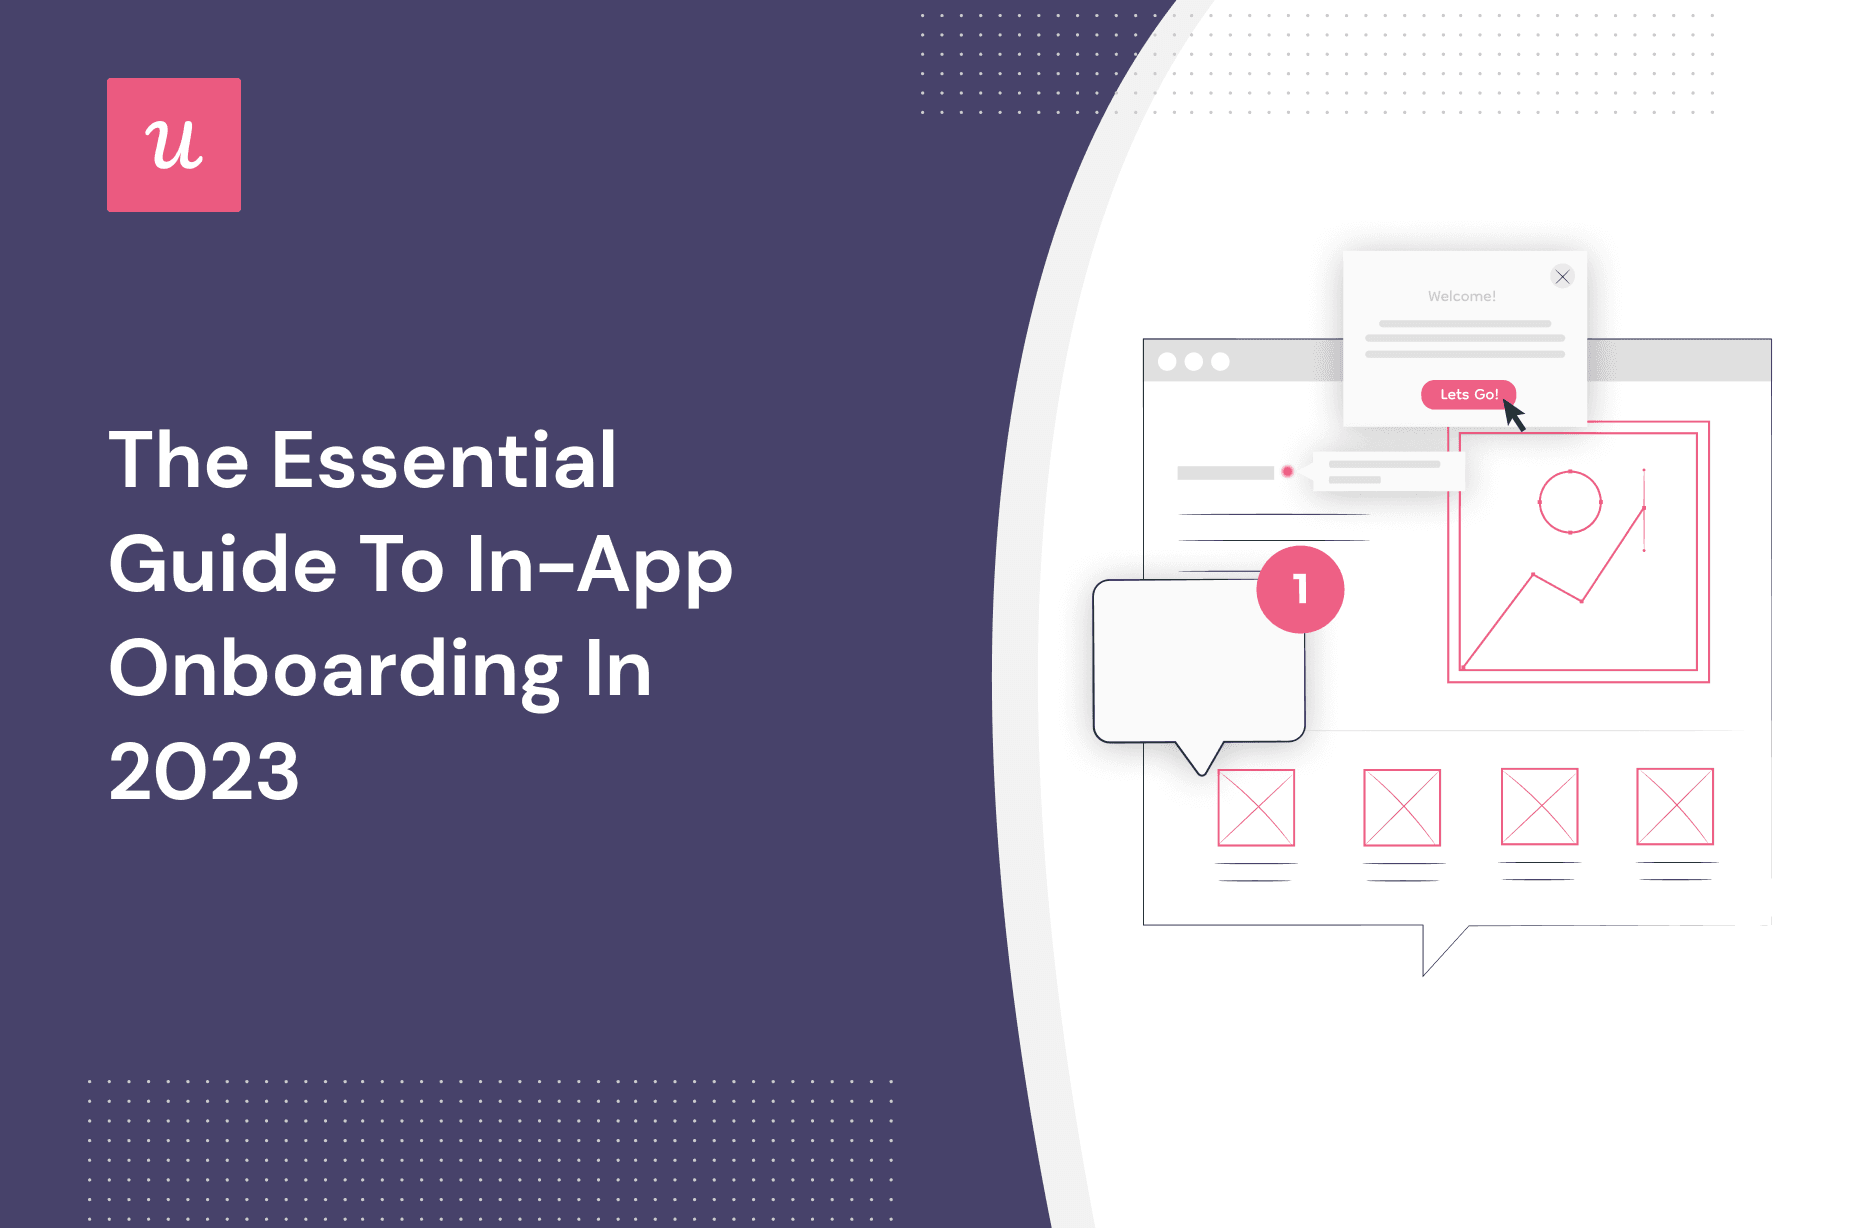 The Essential Guide to In-App Onboarding in 2023 cover